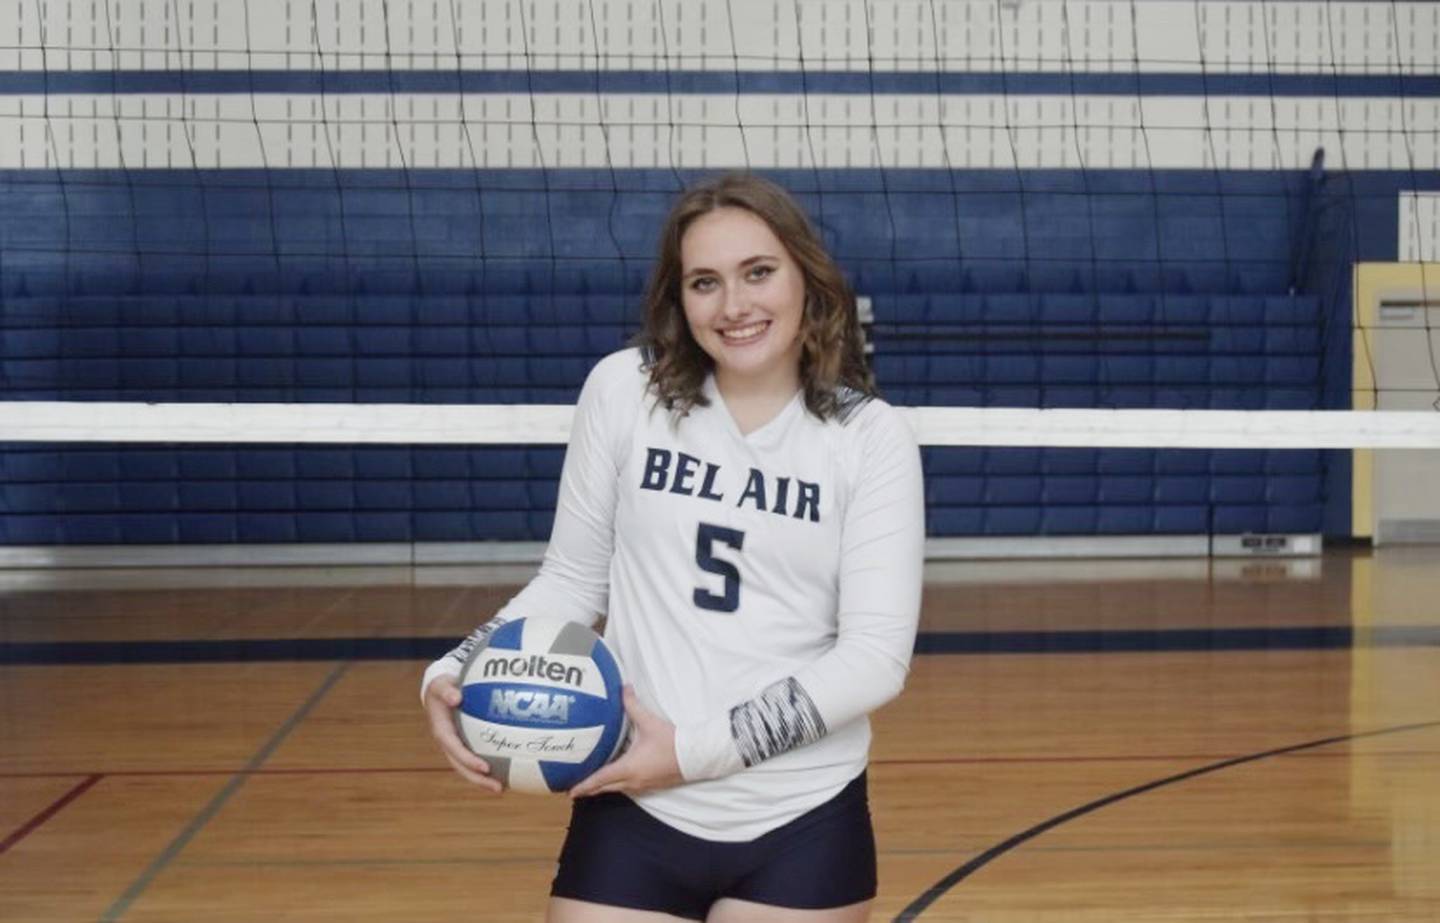 Bel Air setter Kendall Marx never let her dream of playing for the Bobcats die. After getting cut in the past, she made the team this fall. “It was a little bit overwhelming,” said the senior, adding that it took a while to fully realize that she had finally achieved her goal.